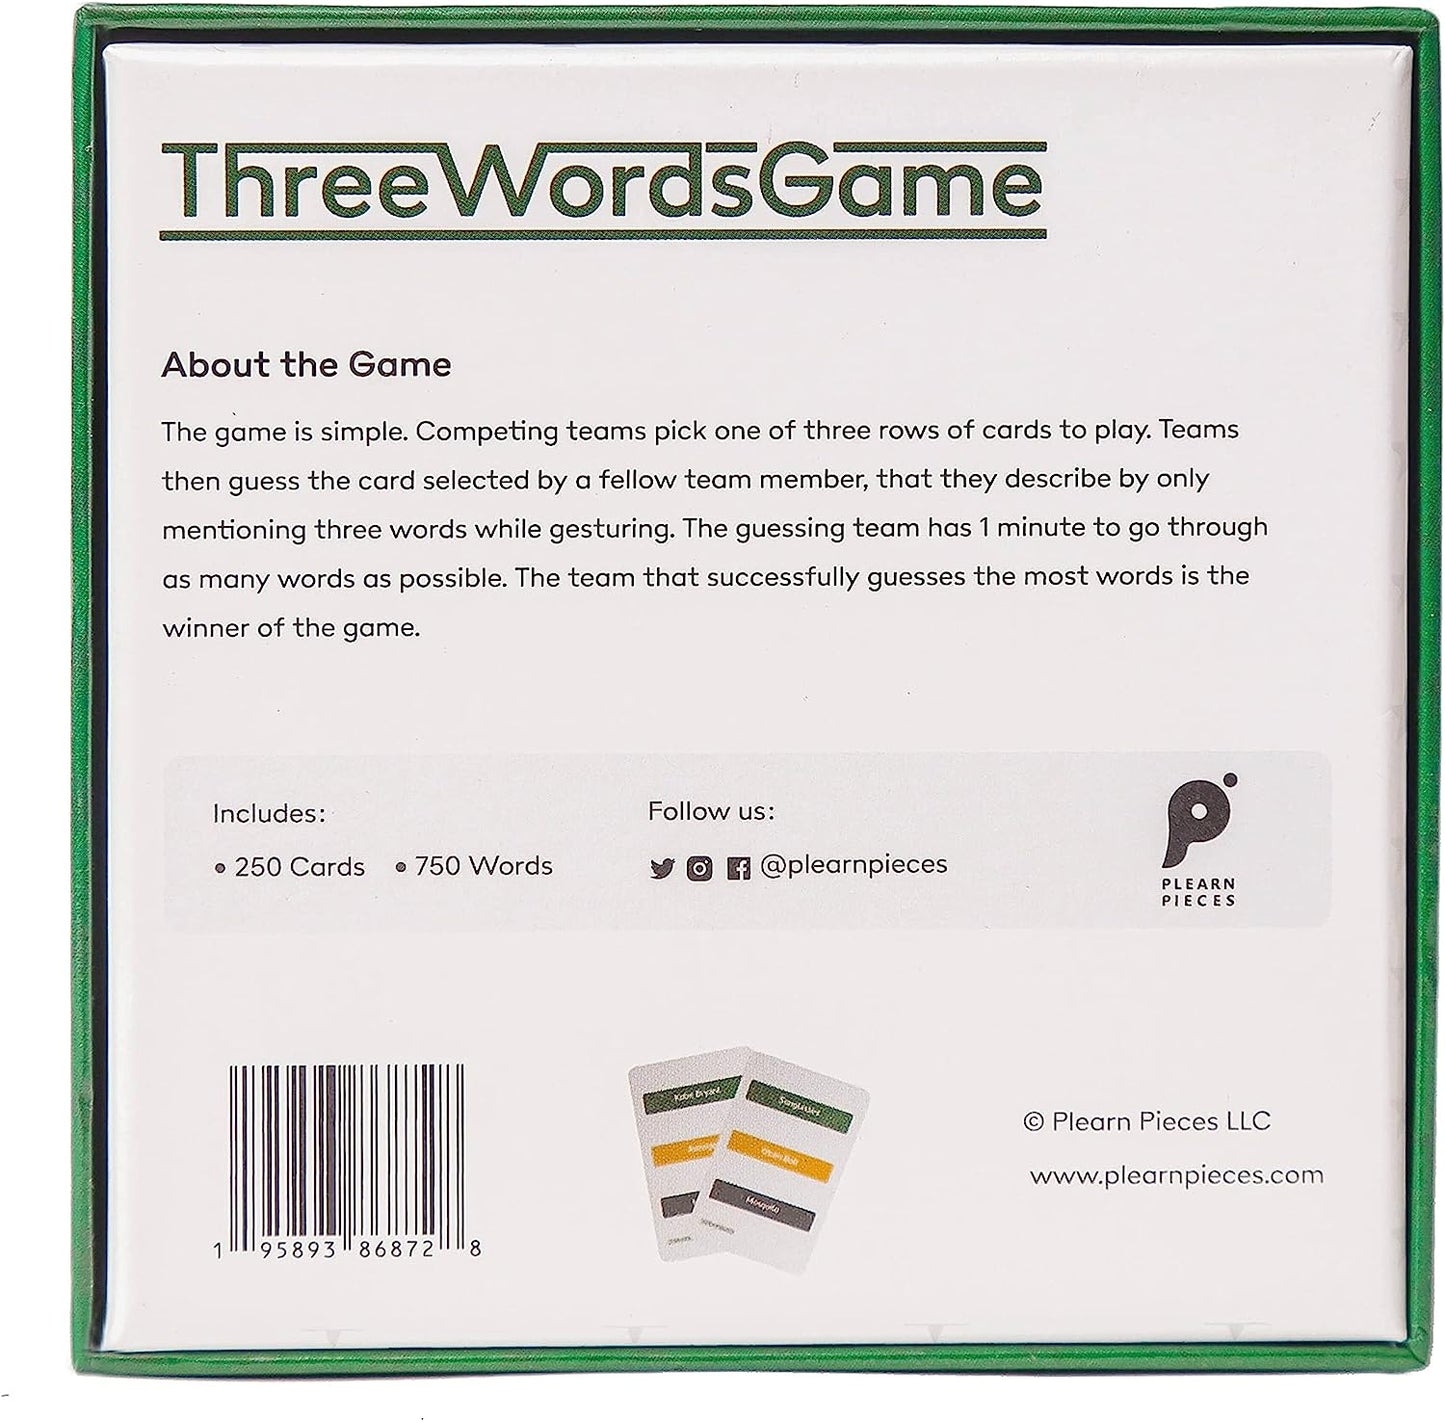 Three Words Game - A Family charades Game of guessing Using Three Words and Gestures - Contains 750 Words